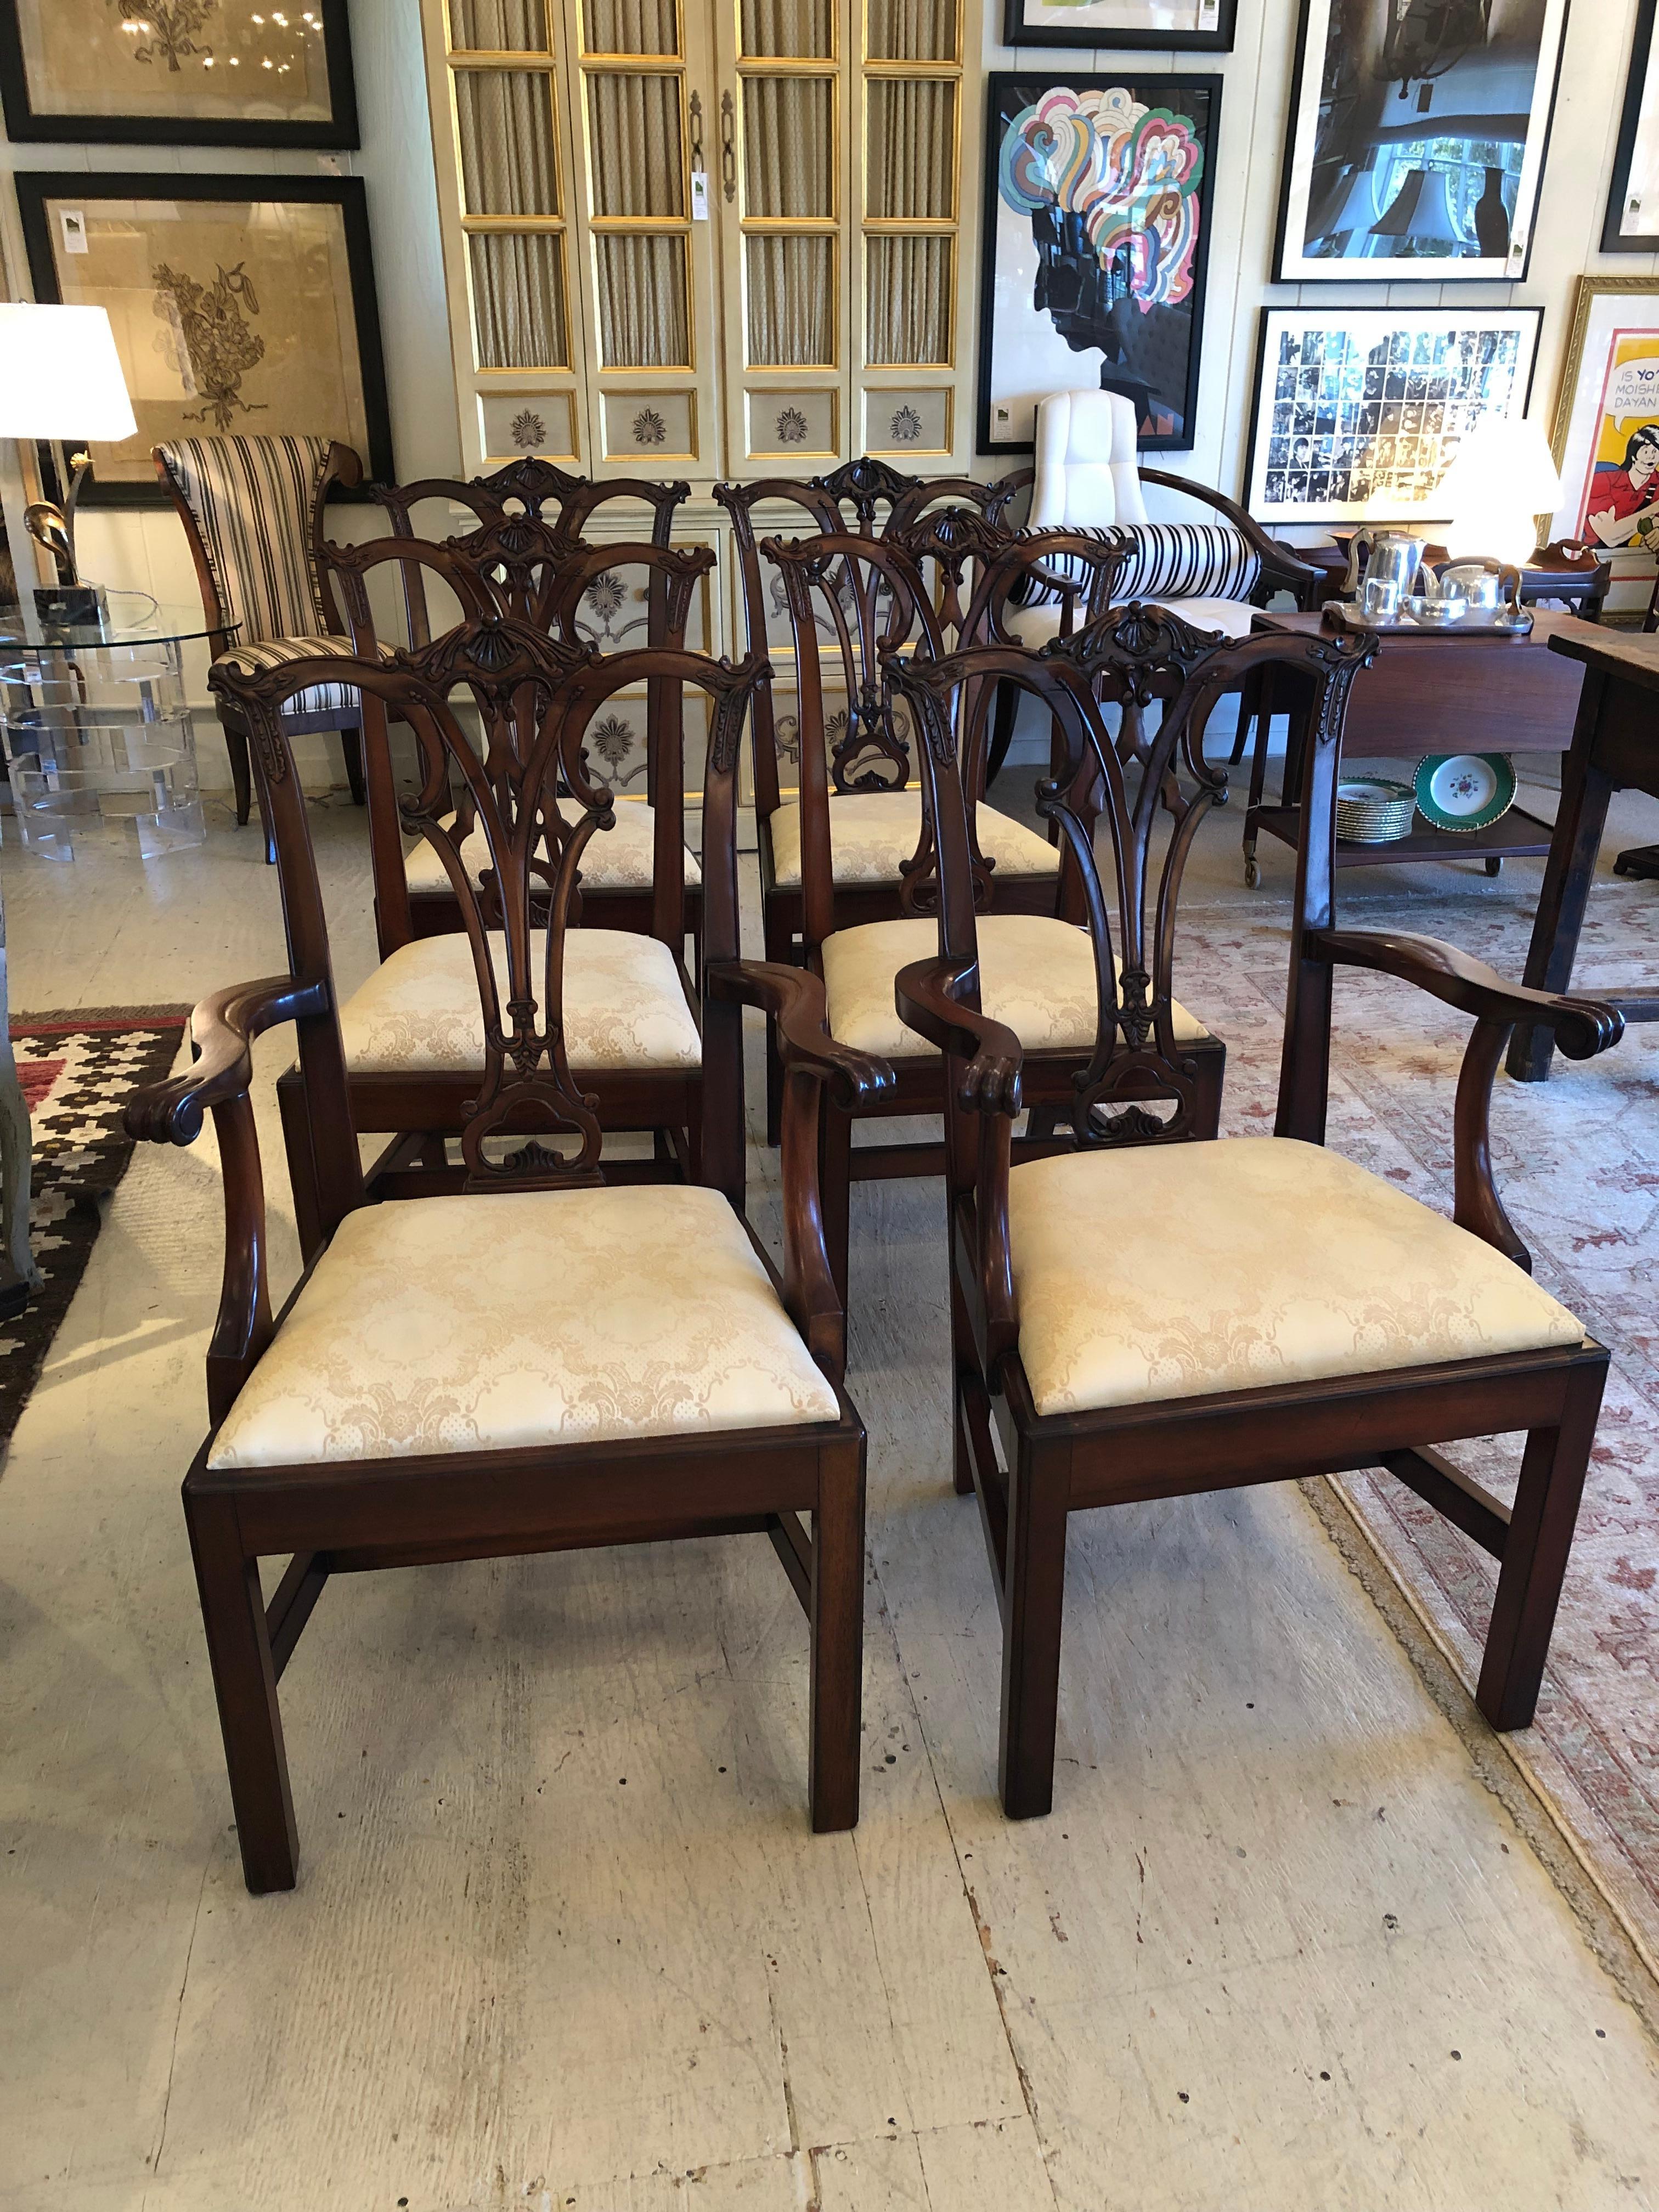 Impressive classic set of carved mahogany Chippendale style dining chairs by Sovereign having two arm chairs and 4 side chairs with rich color wood and elegant light gold creamy seat upholstery.
Side chairs 21 W 19.25 D 40 H seat height 19.5.
Arm